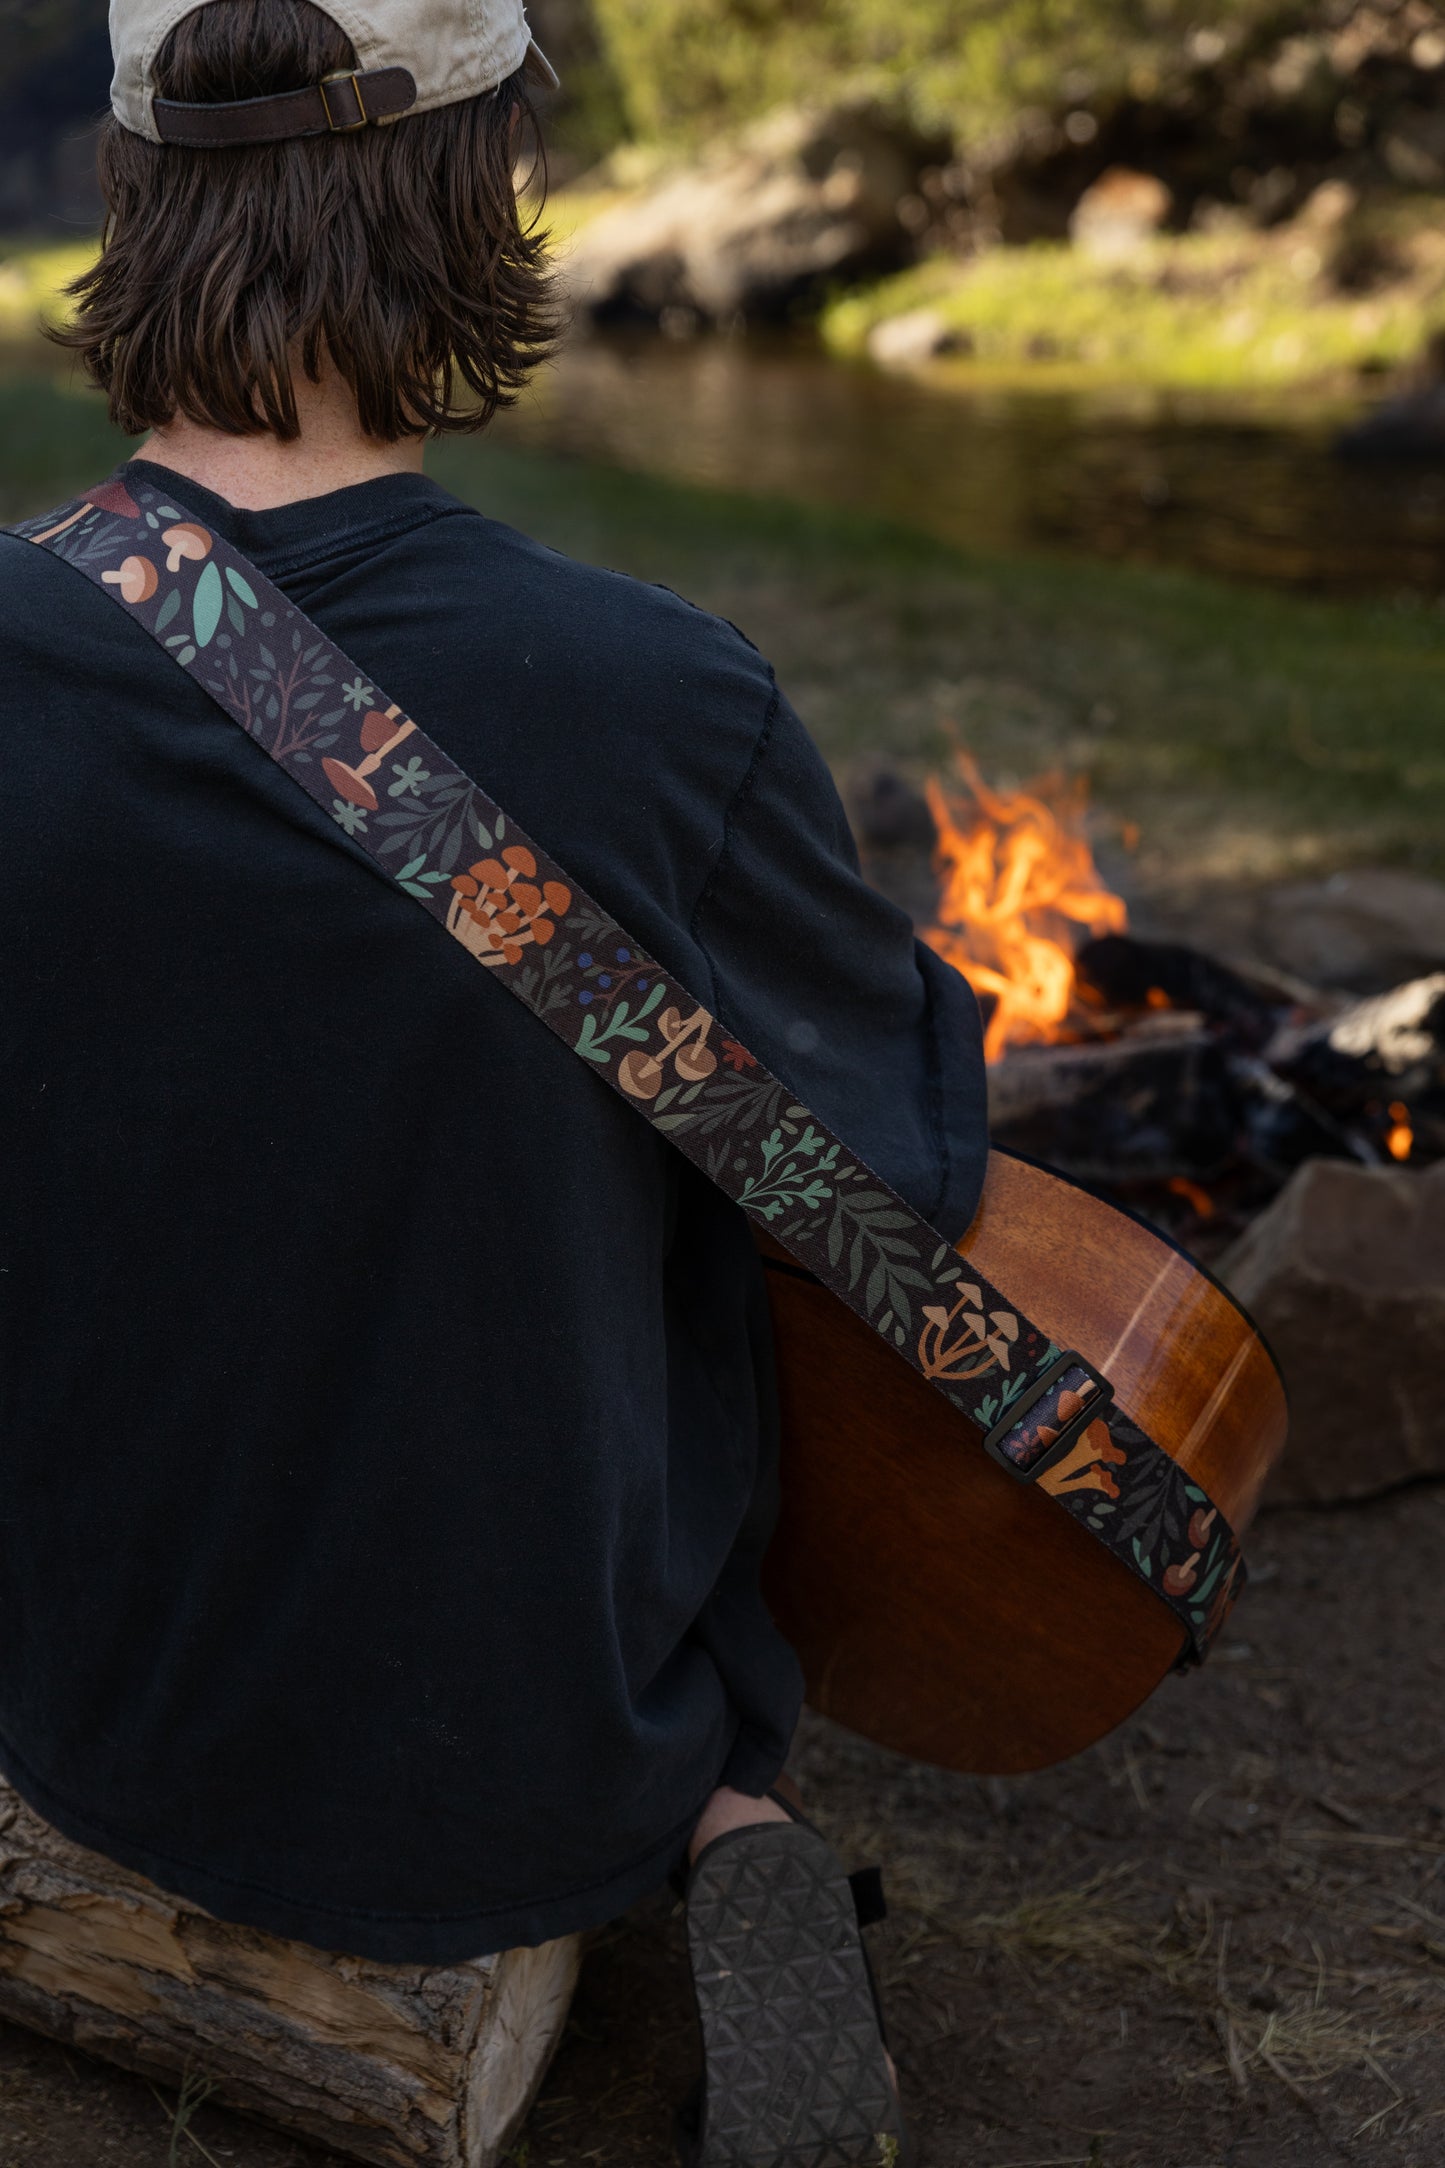 Forest Foliage guitar strap outside around a campfire playing guitar